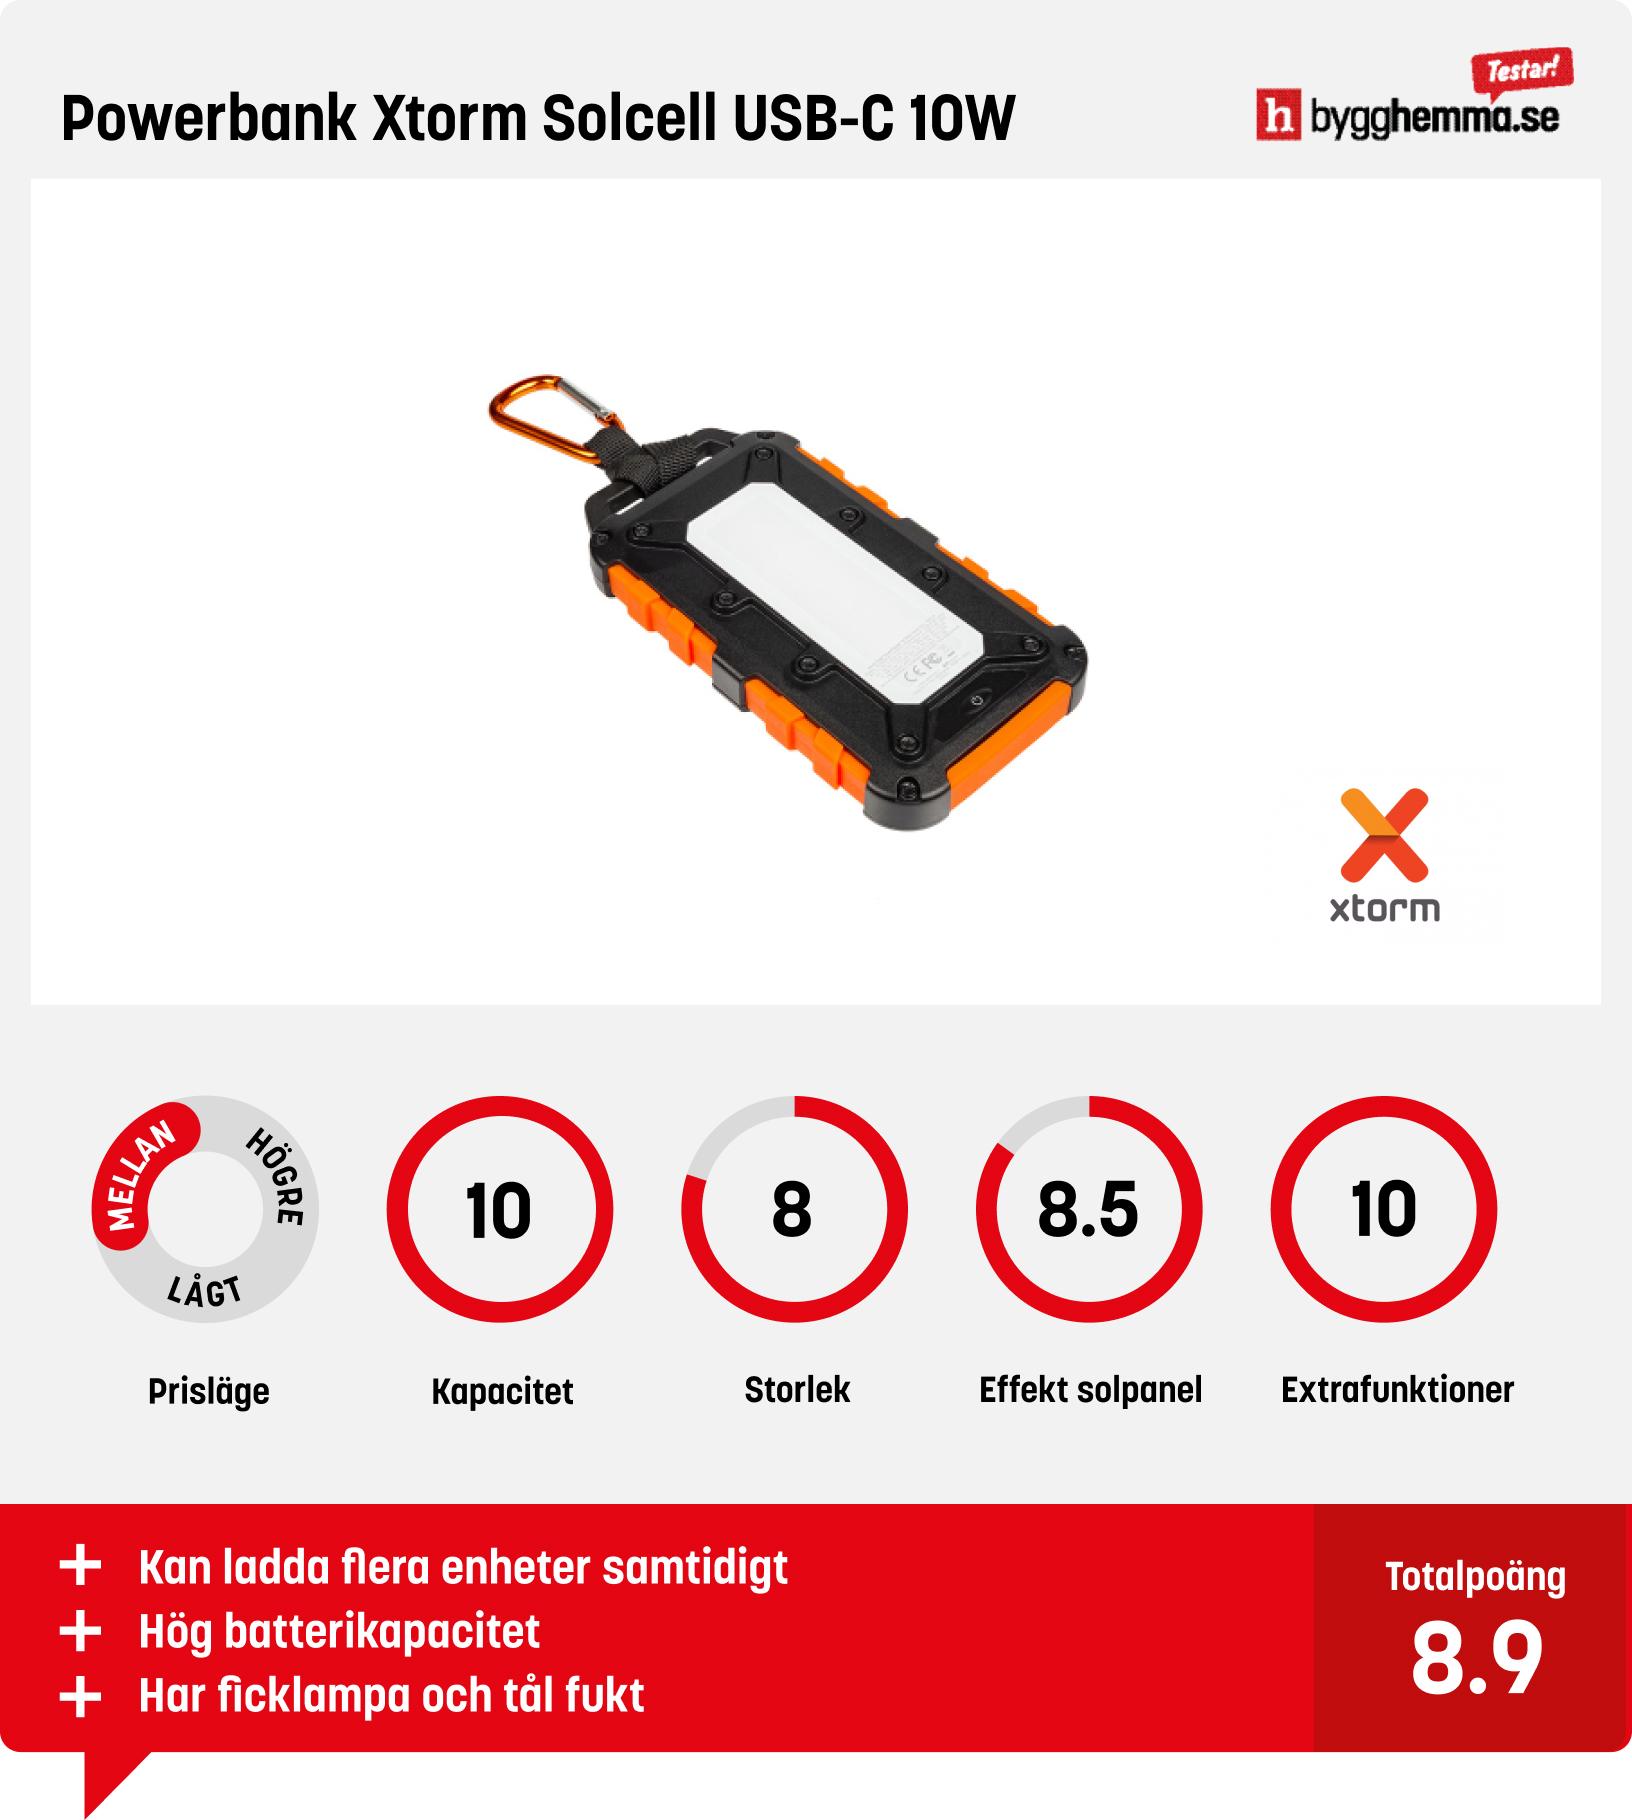 Powerbank solcell test - Powerbank Xtorm Solcell USB-C 10W